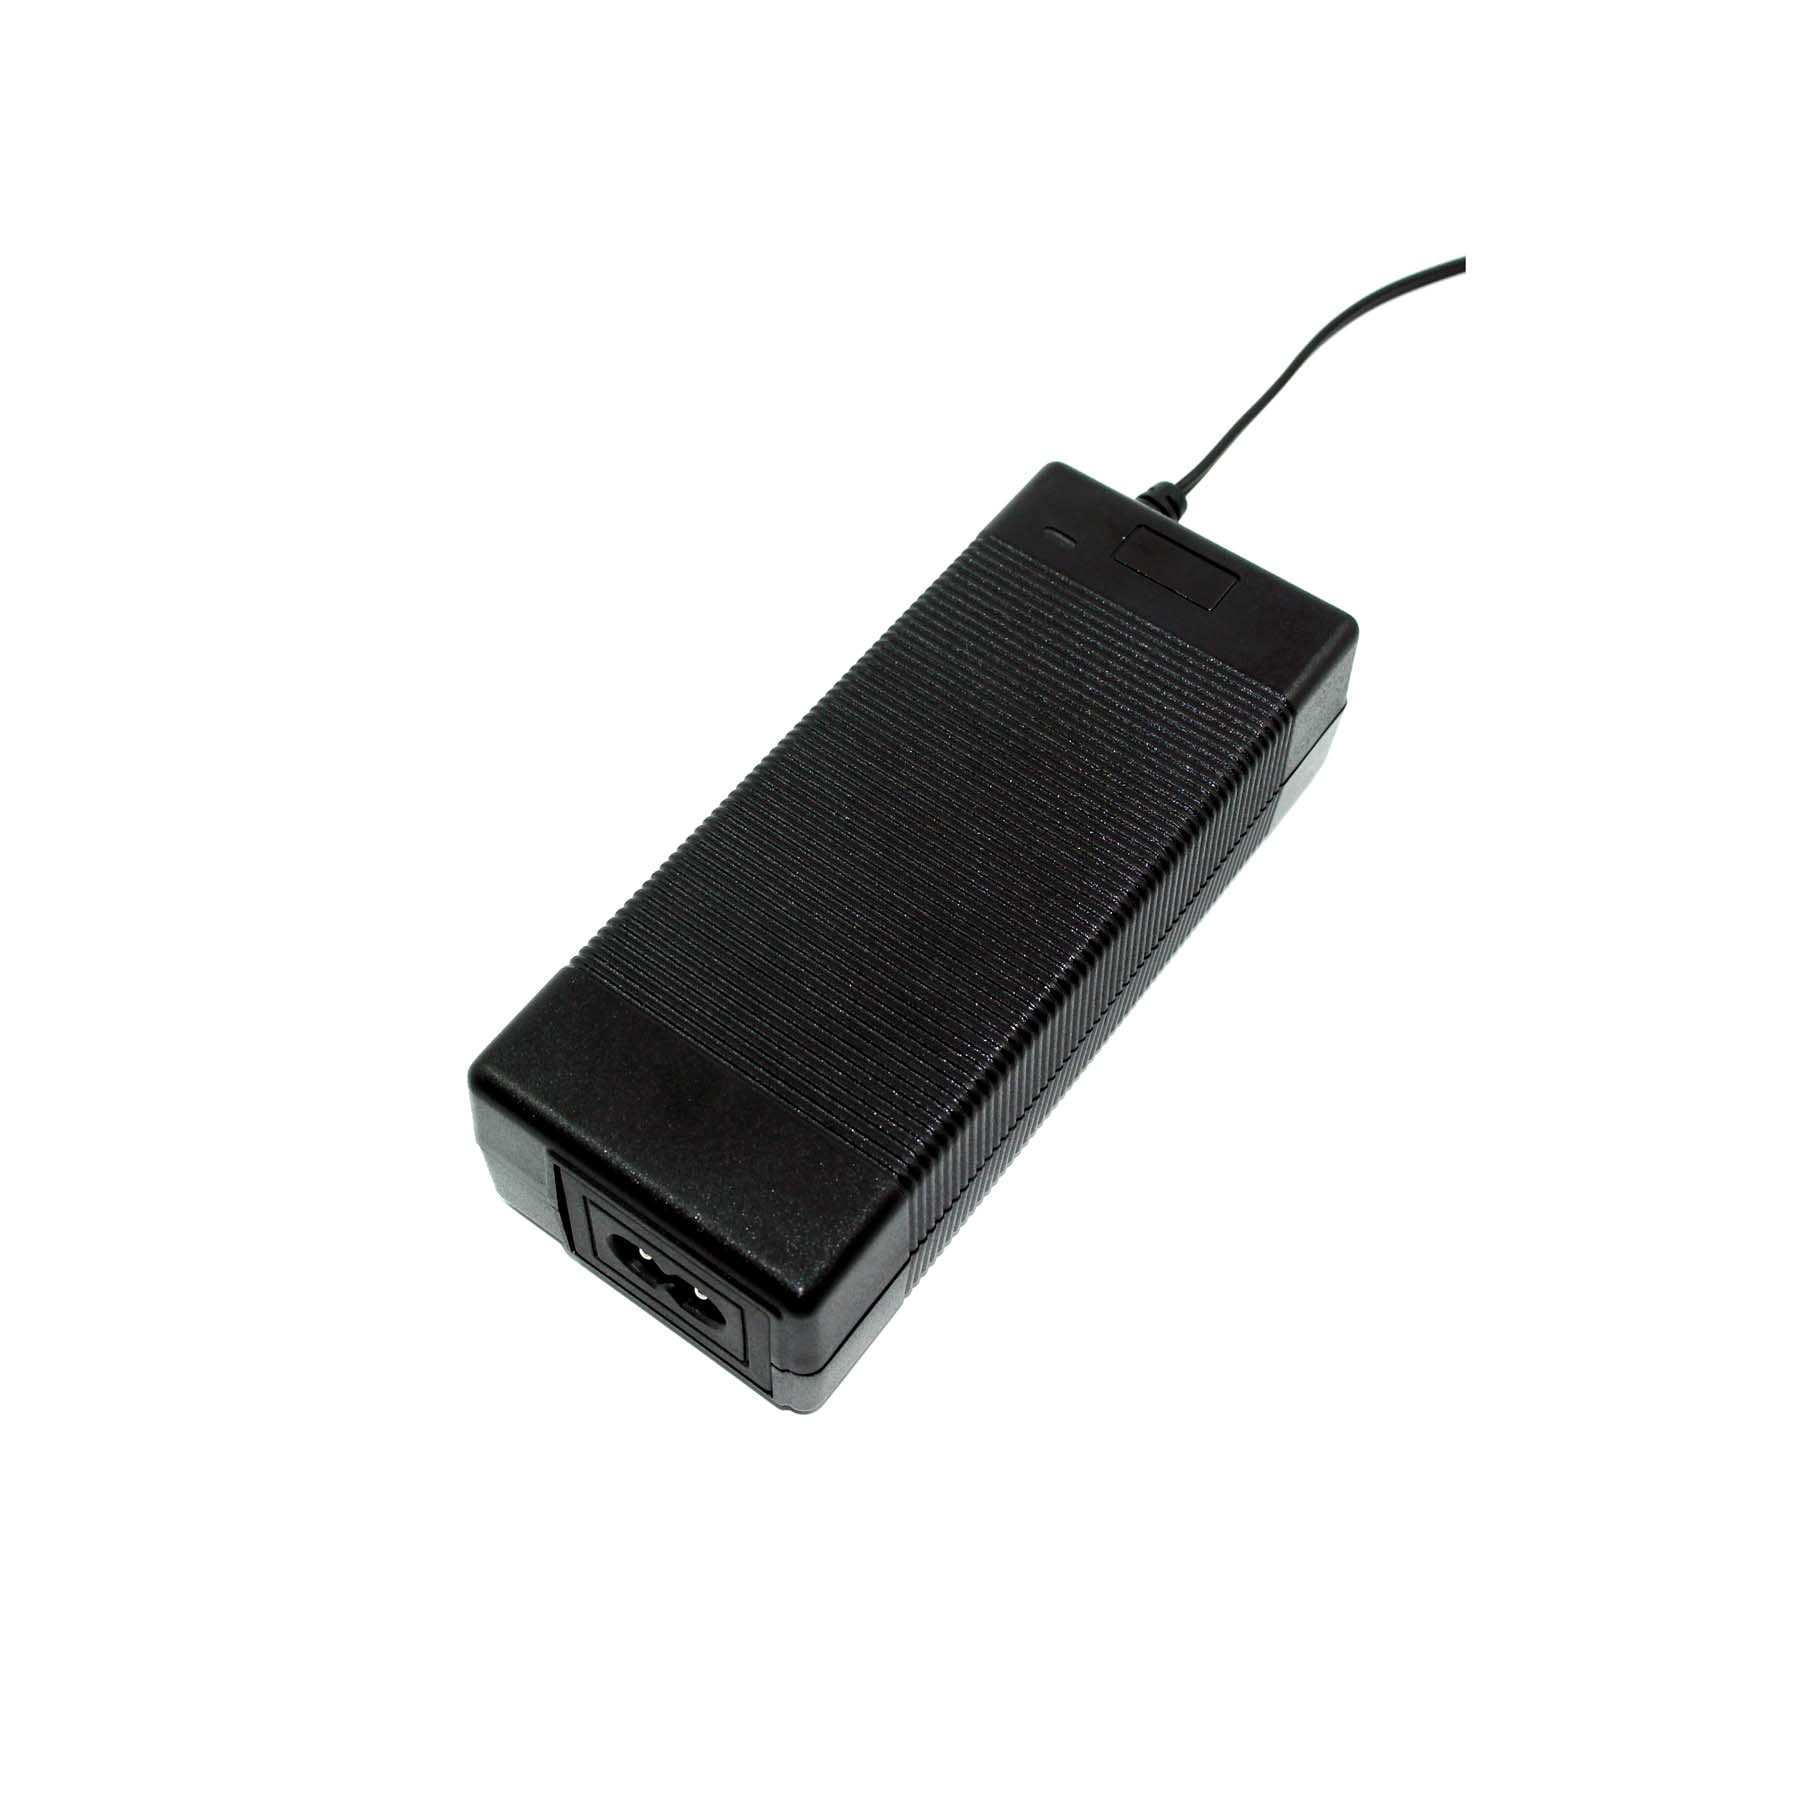 24V 2.08A 50W Switching power supply, C8 connector